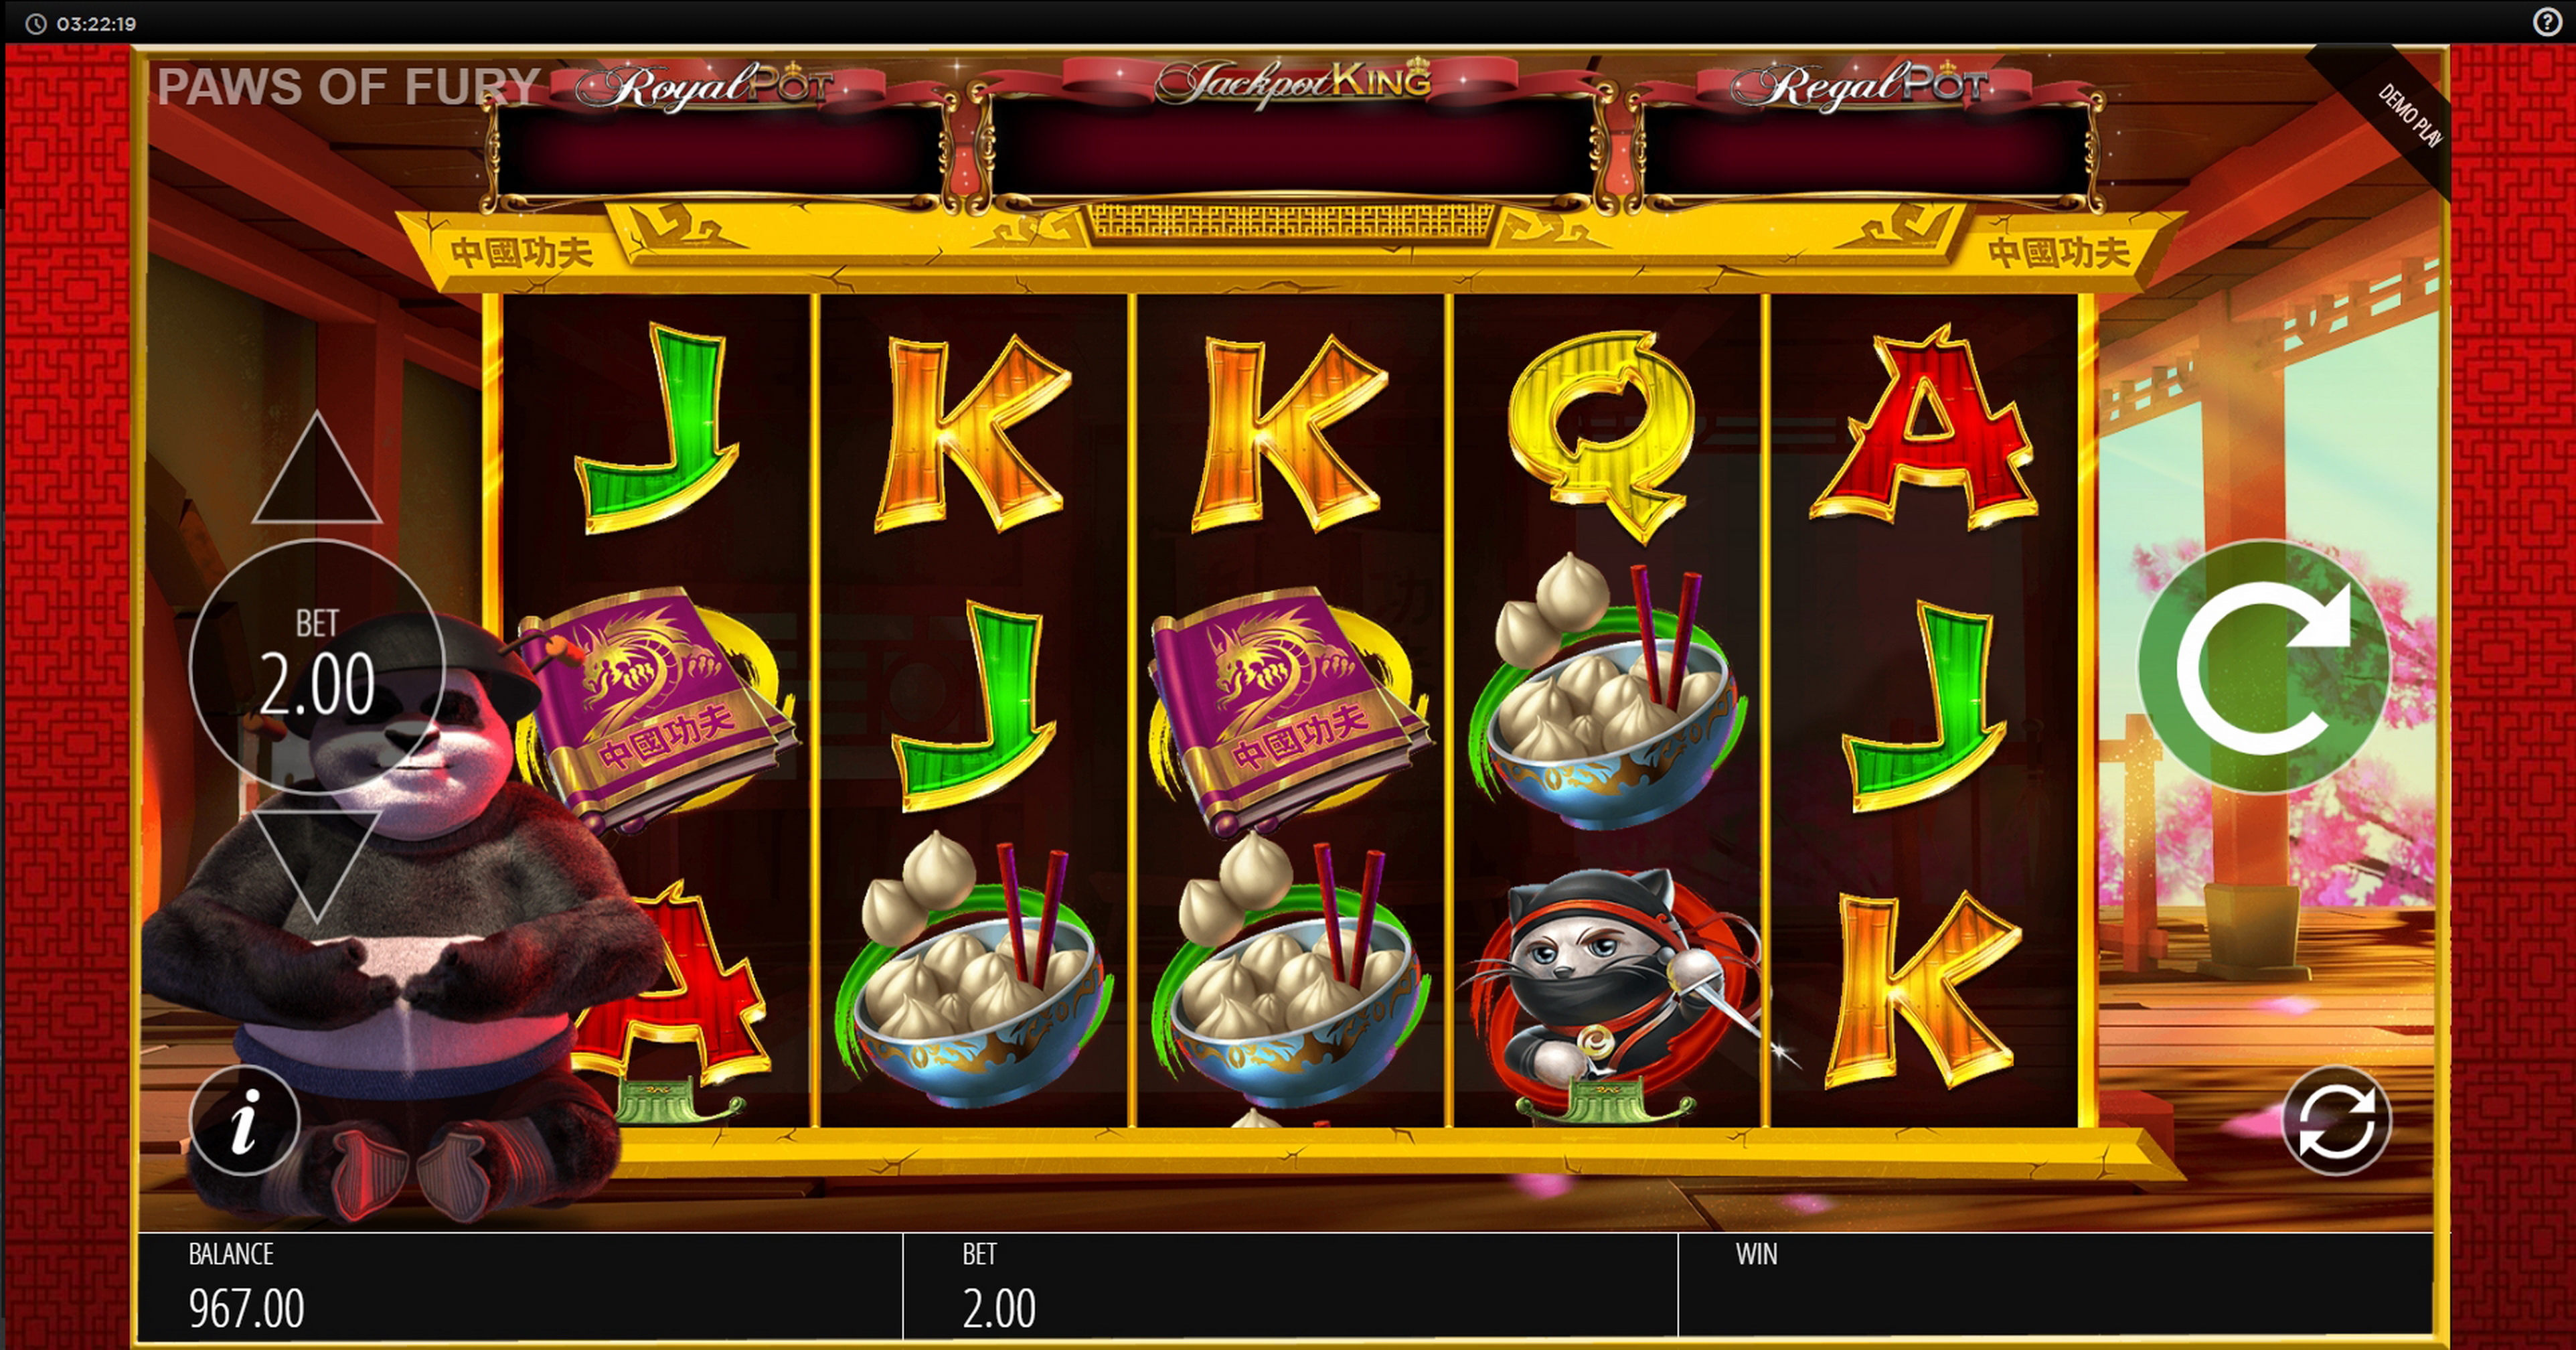 Reels in Paws of Fury Slot Game by Blueprint Gaming